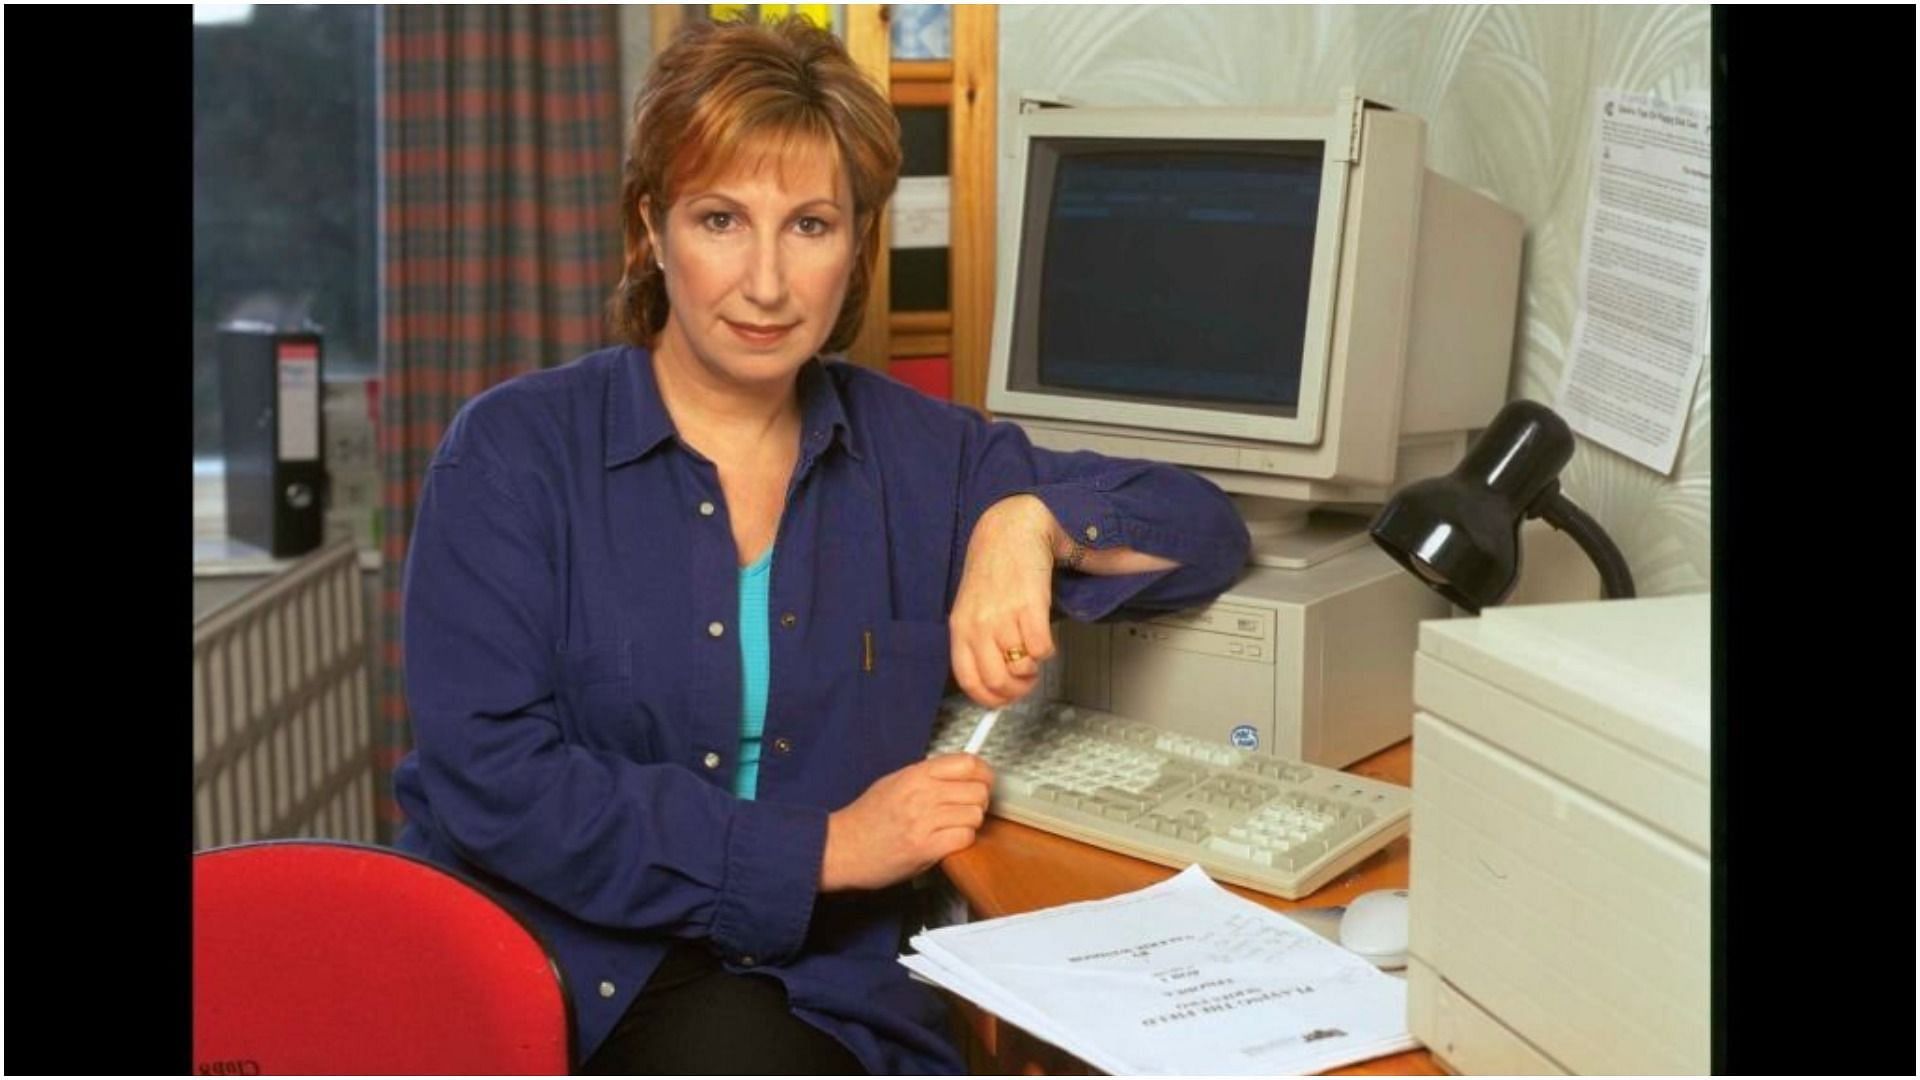 Kay Mellor was a famous actress, scriptwriter and director (Image via Mike Lawn/Getty Images)